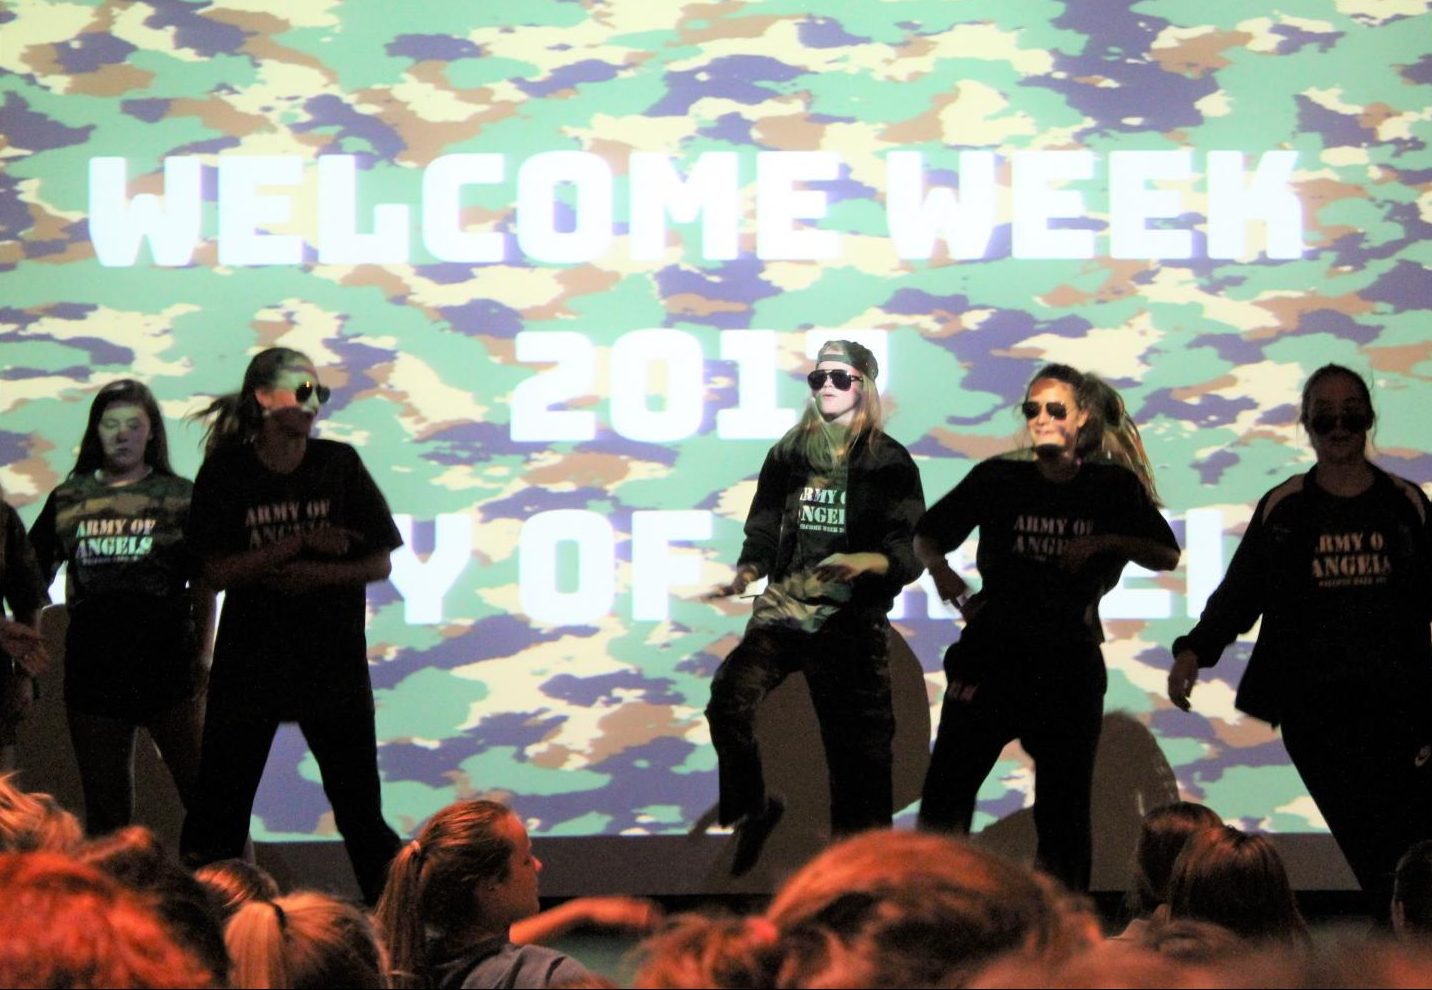 STUCO+members+kick+off+welcome+week+with+the+reveal+of+the+theme+and+freshman+hats